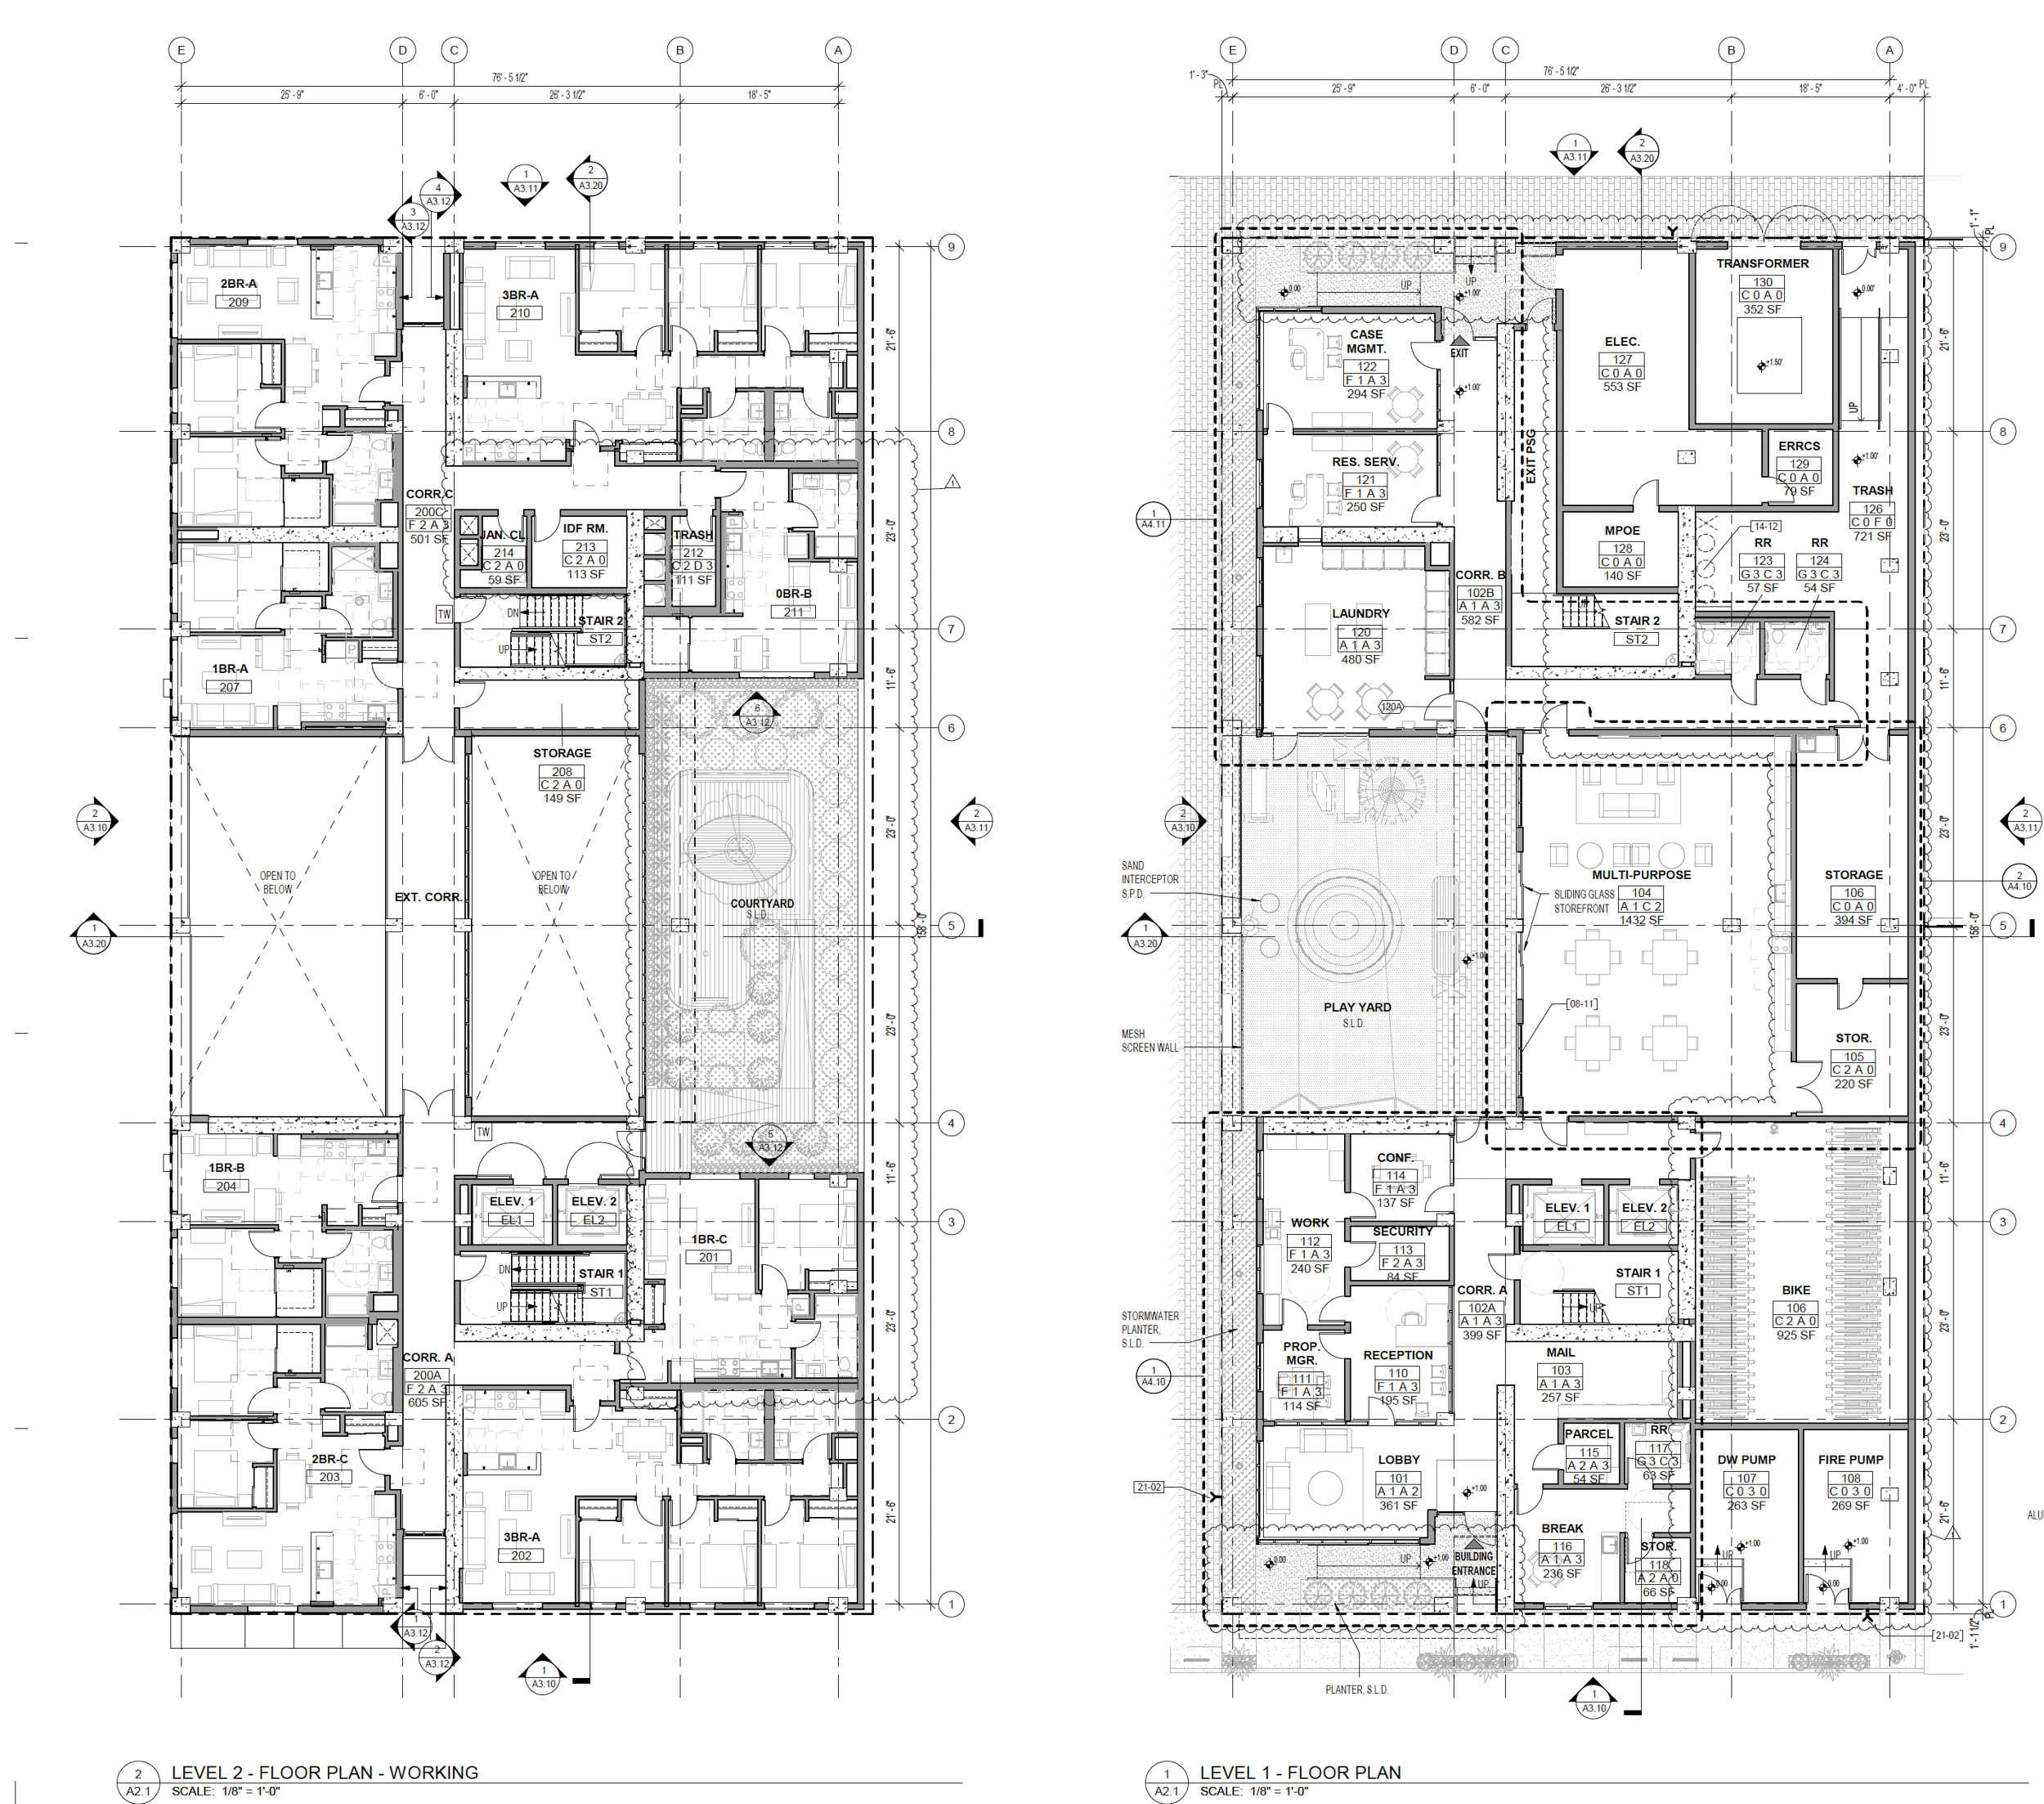 160 Freelon Street floor plans for levels one and two, illustration by LMSa and YA Studio